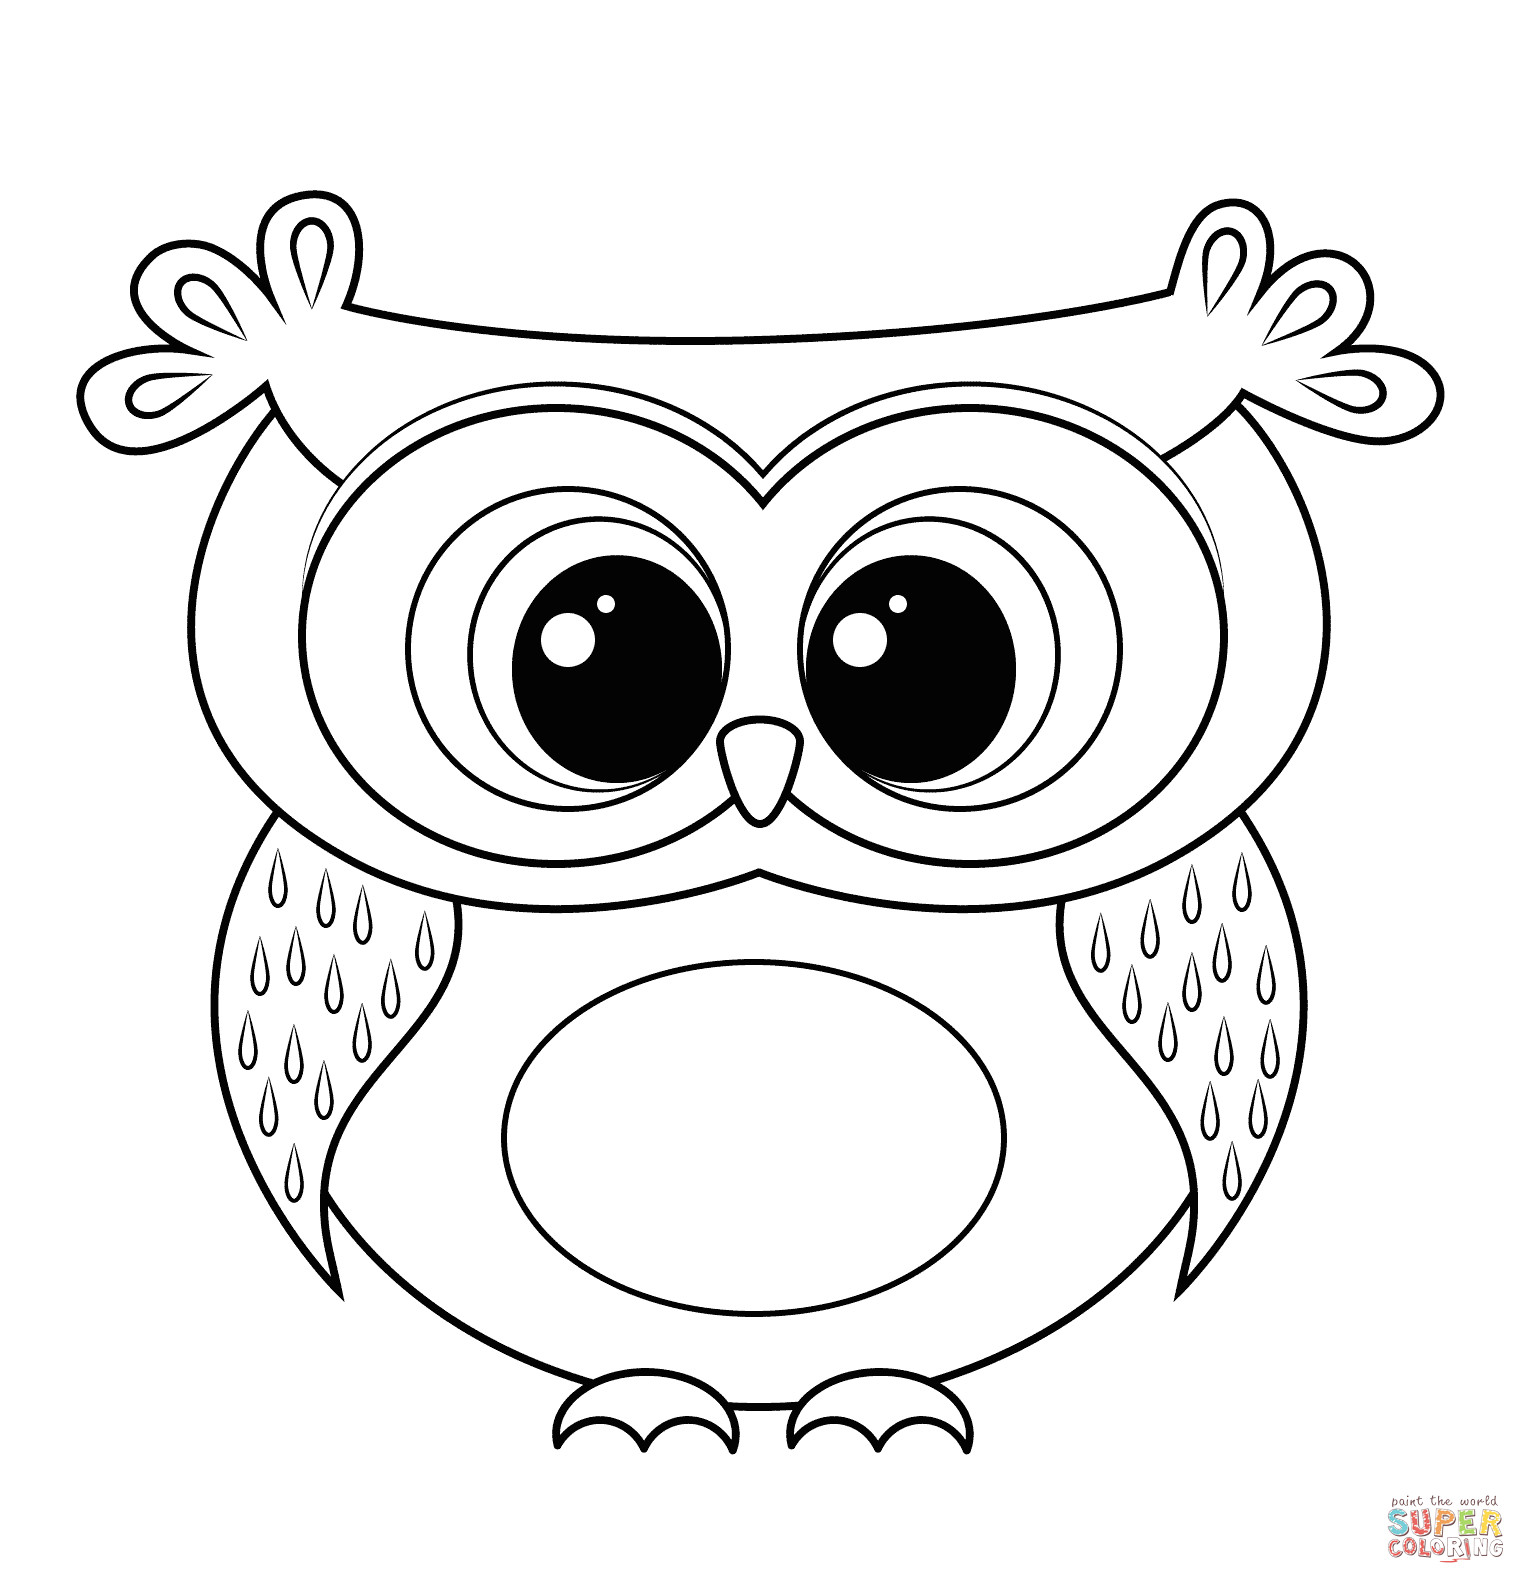 Cartoon Drawing Worksheet Cartoon Owl Coloring Page Free Printable Coloring Pages Designs